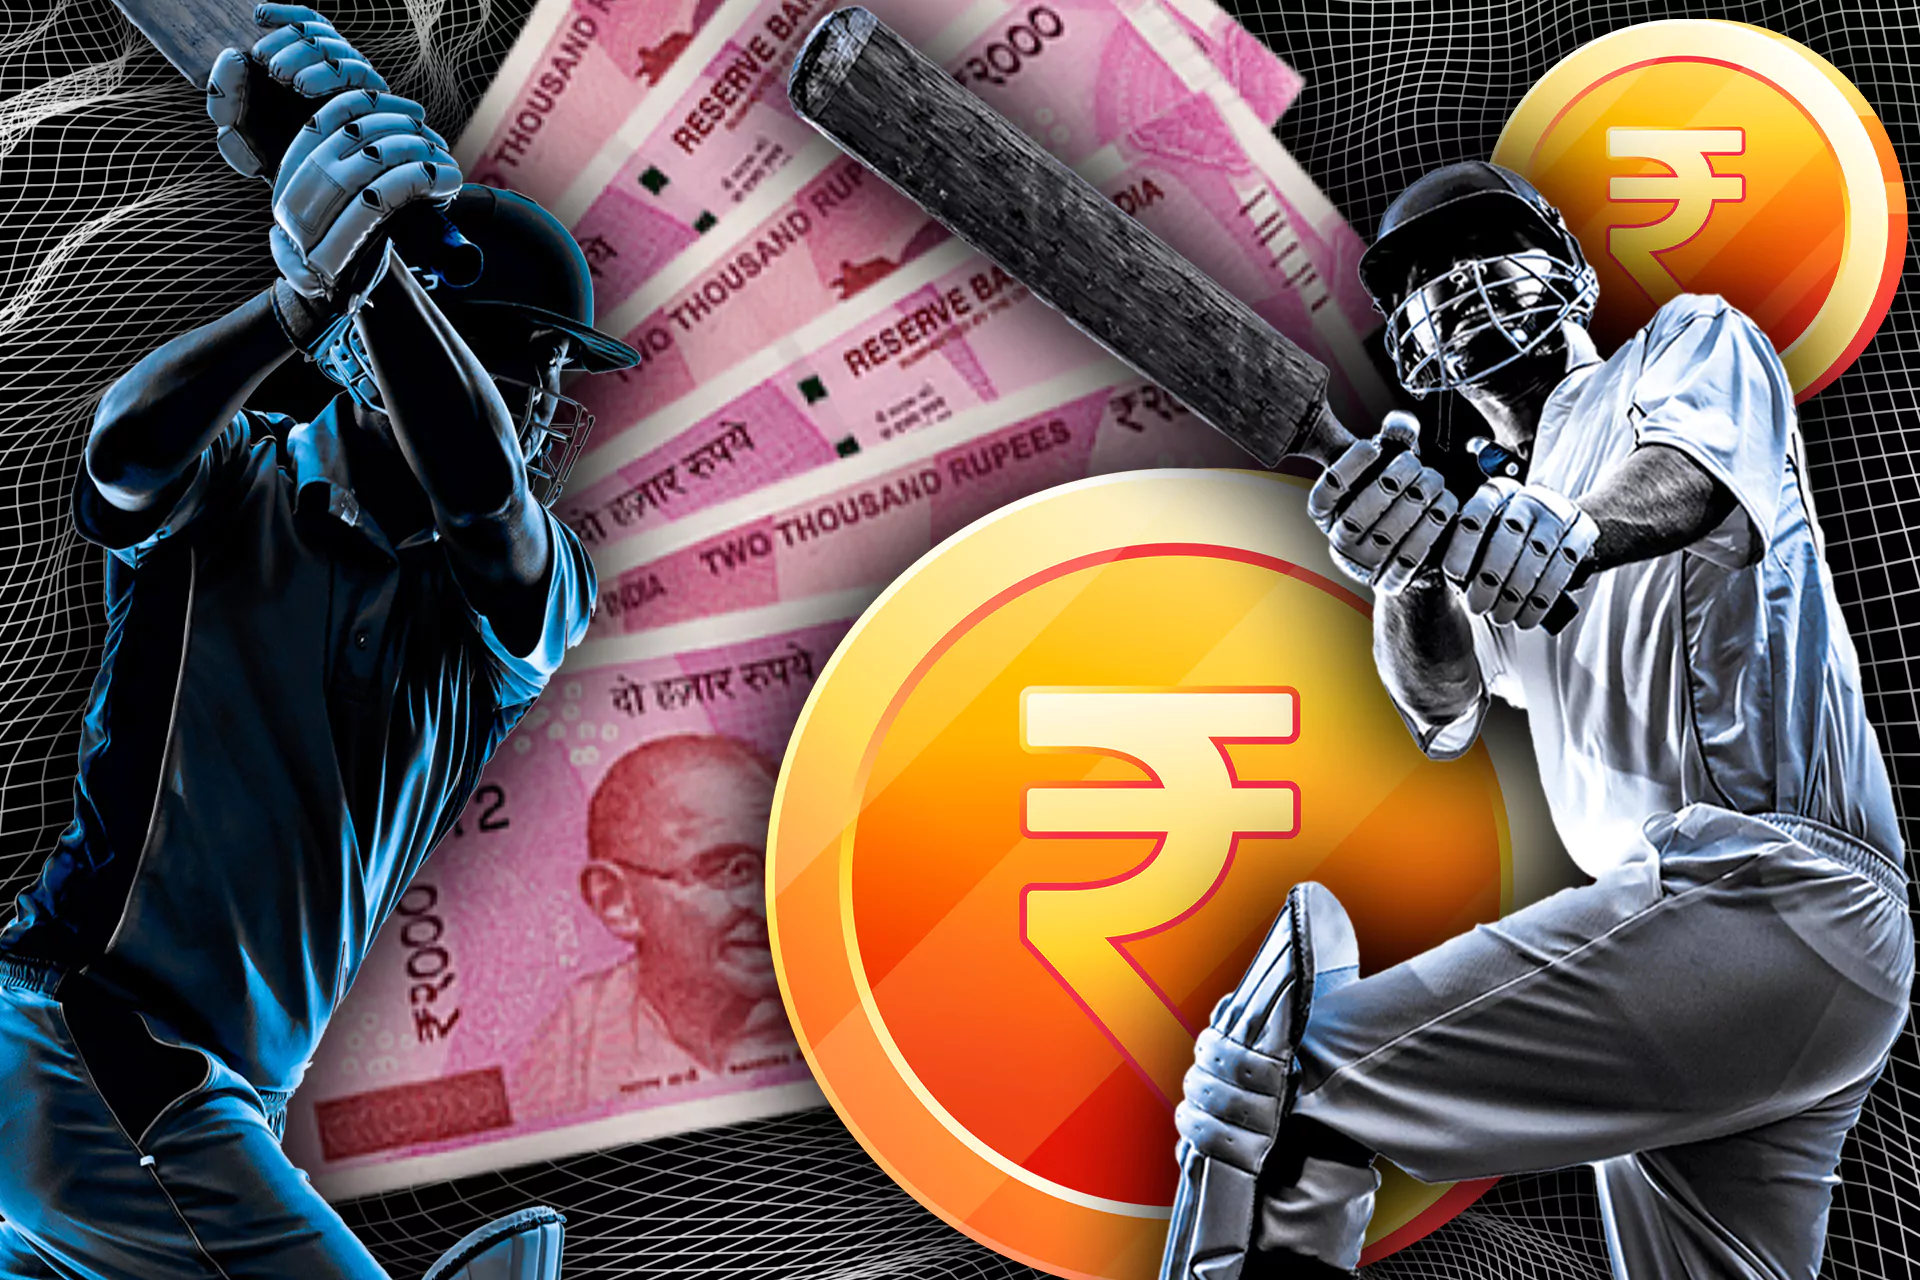 It's better to use bookmaker's that offer indian ruppes as gaming currency.